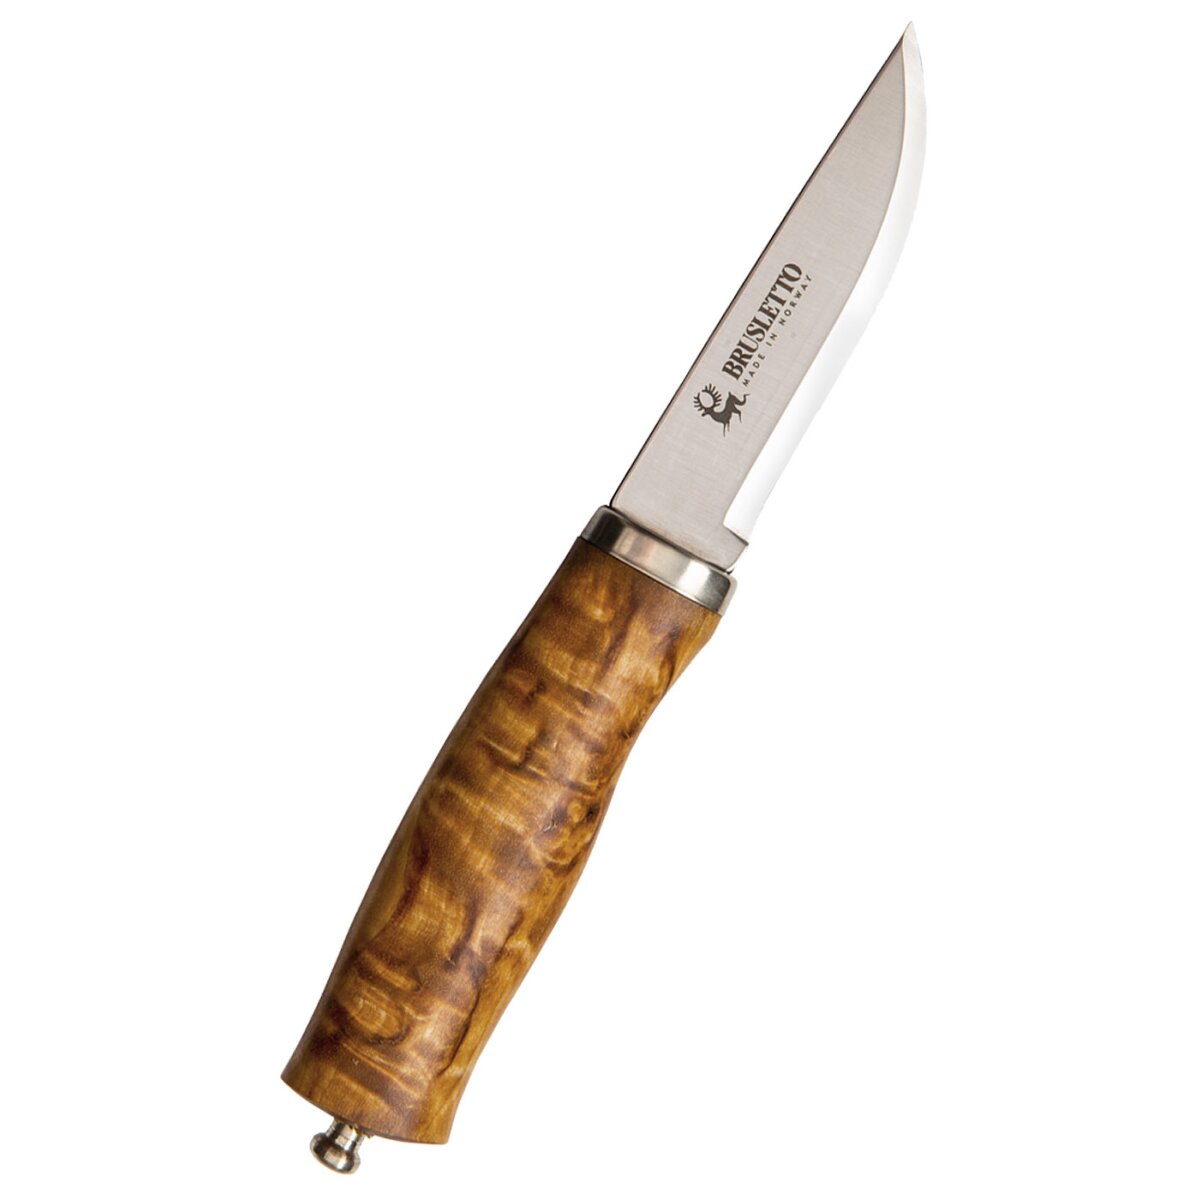 Outdoor knife Halling Jaktia Edition, Brusletto